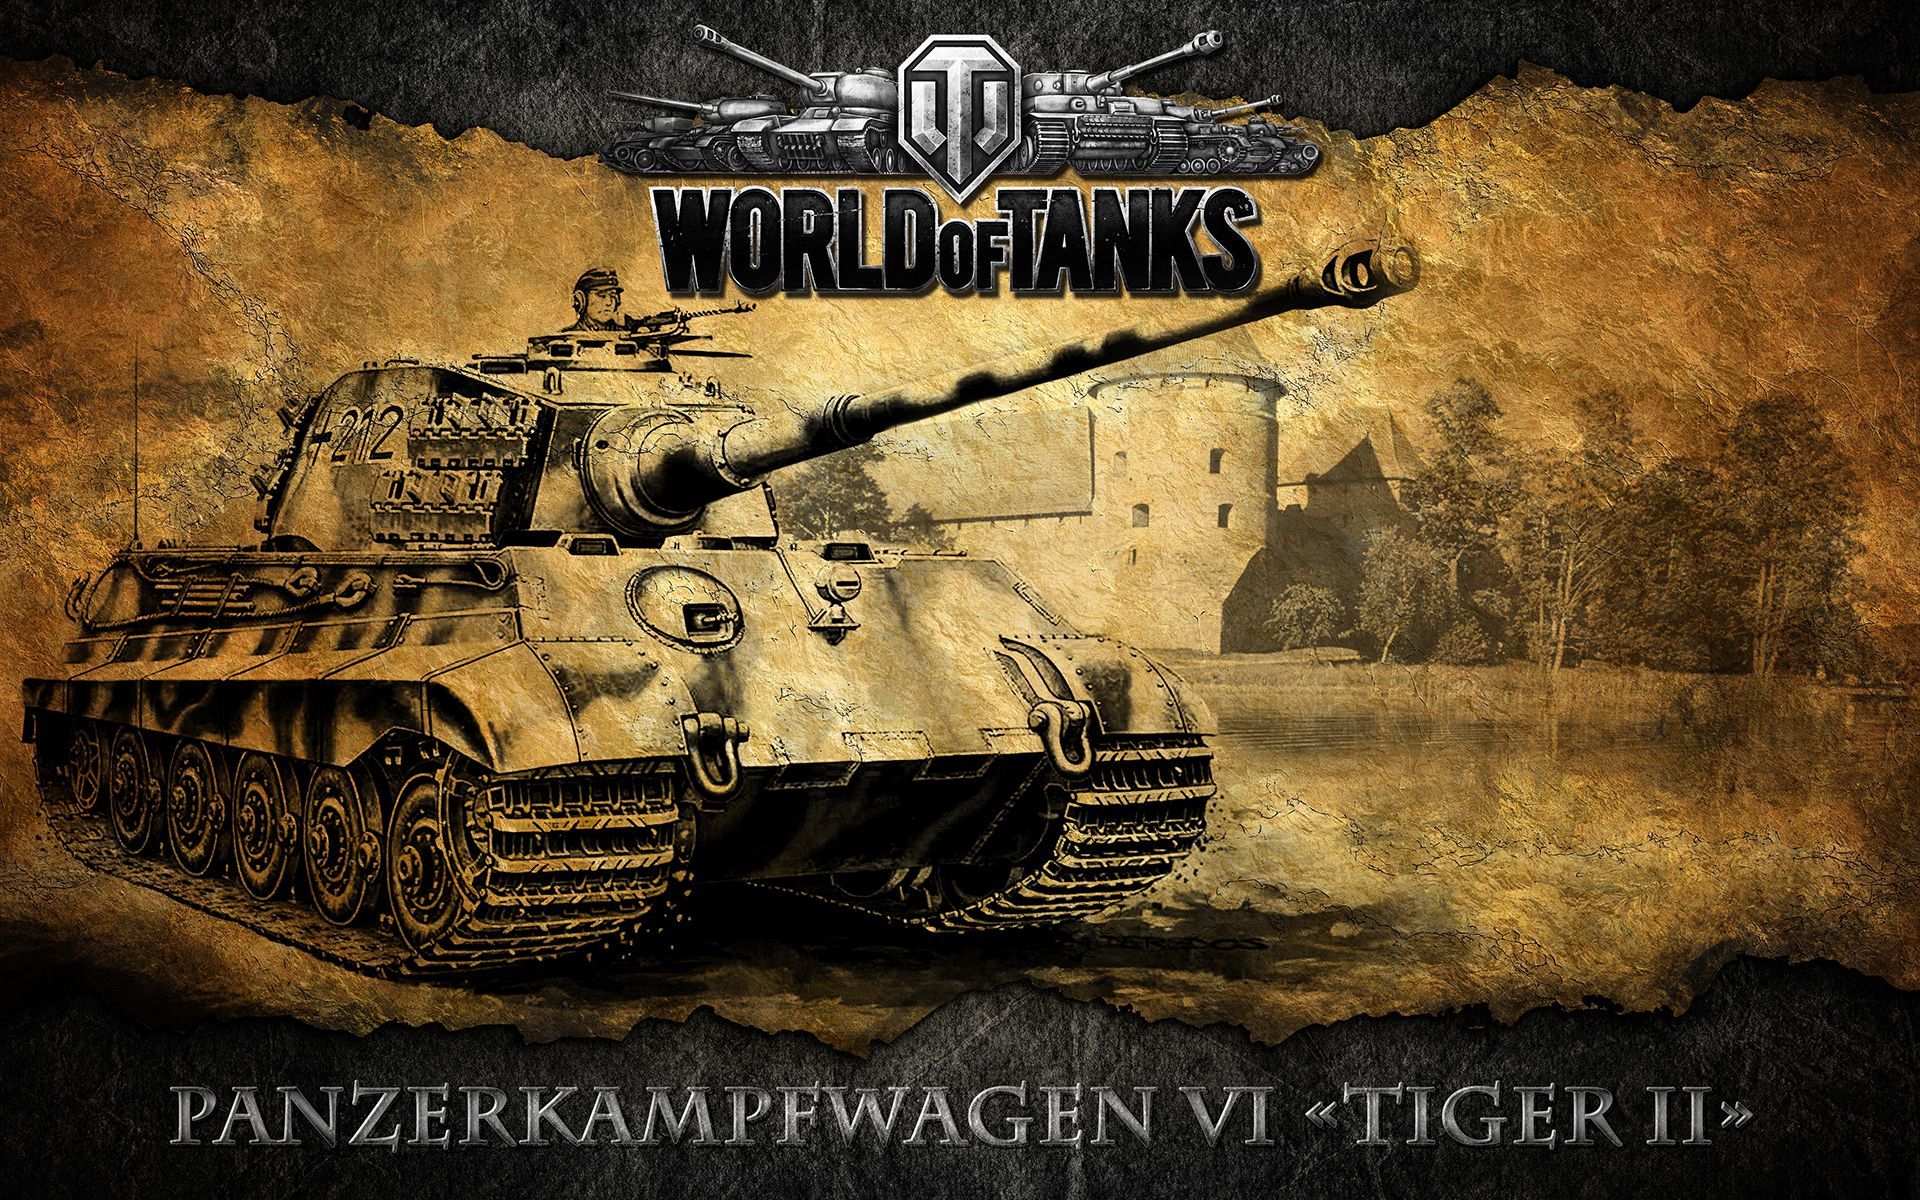 Wallpaper of World of tanks, WoT, Tiger II, Video Game background